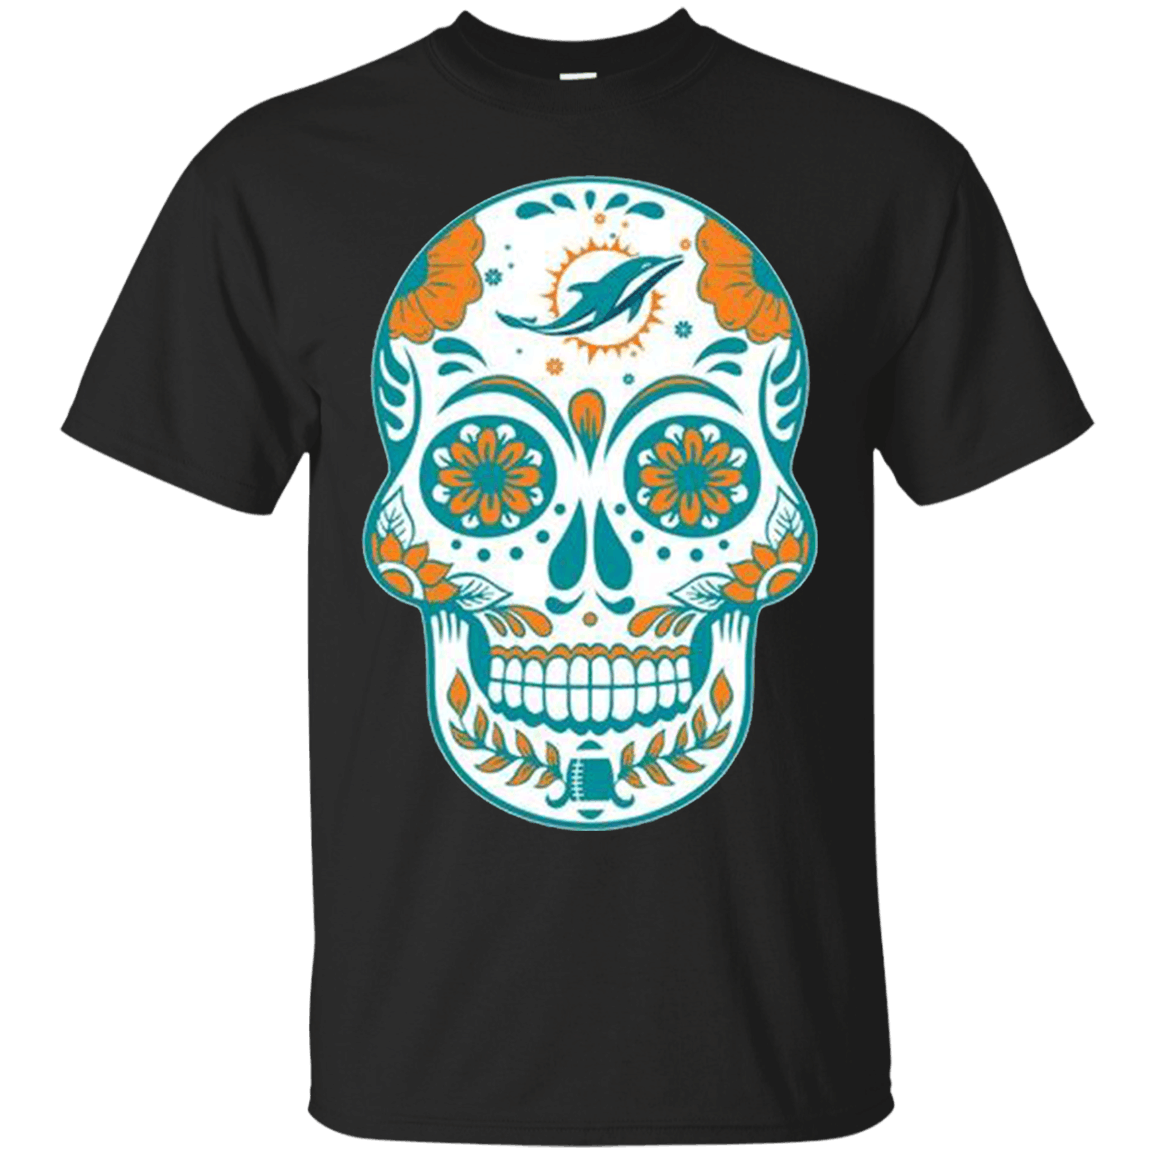 Miami Dolphins Shop - Check out this awesome Miami Dolphins Sugar Skull T shirt 1